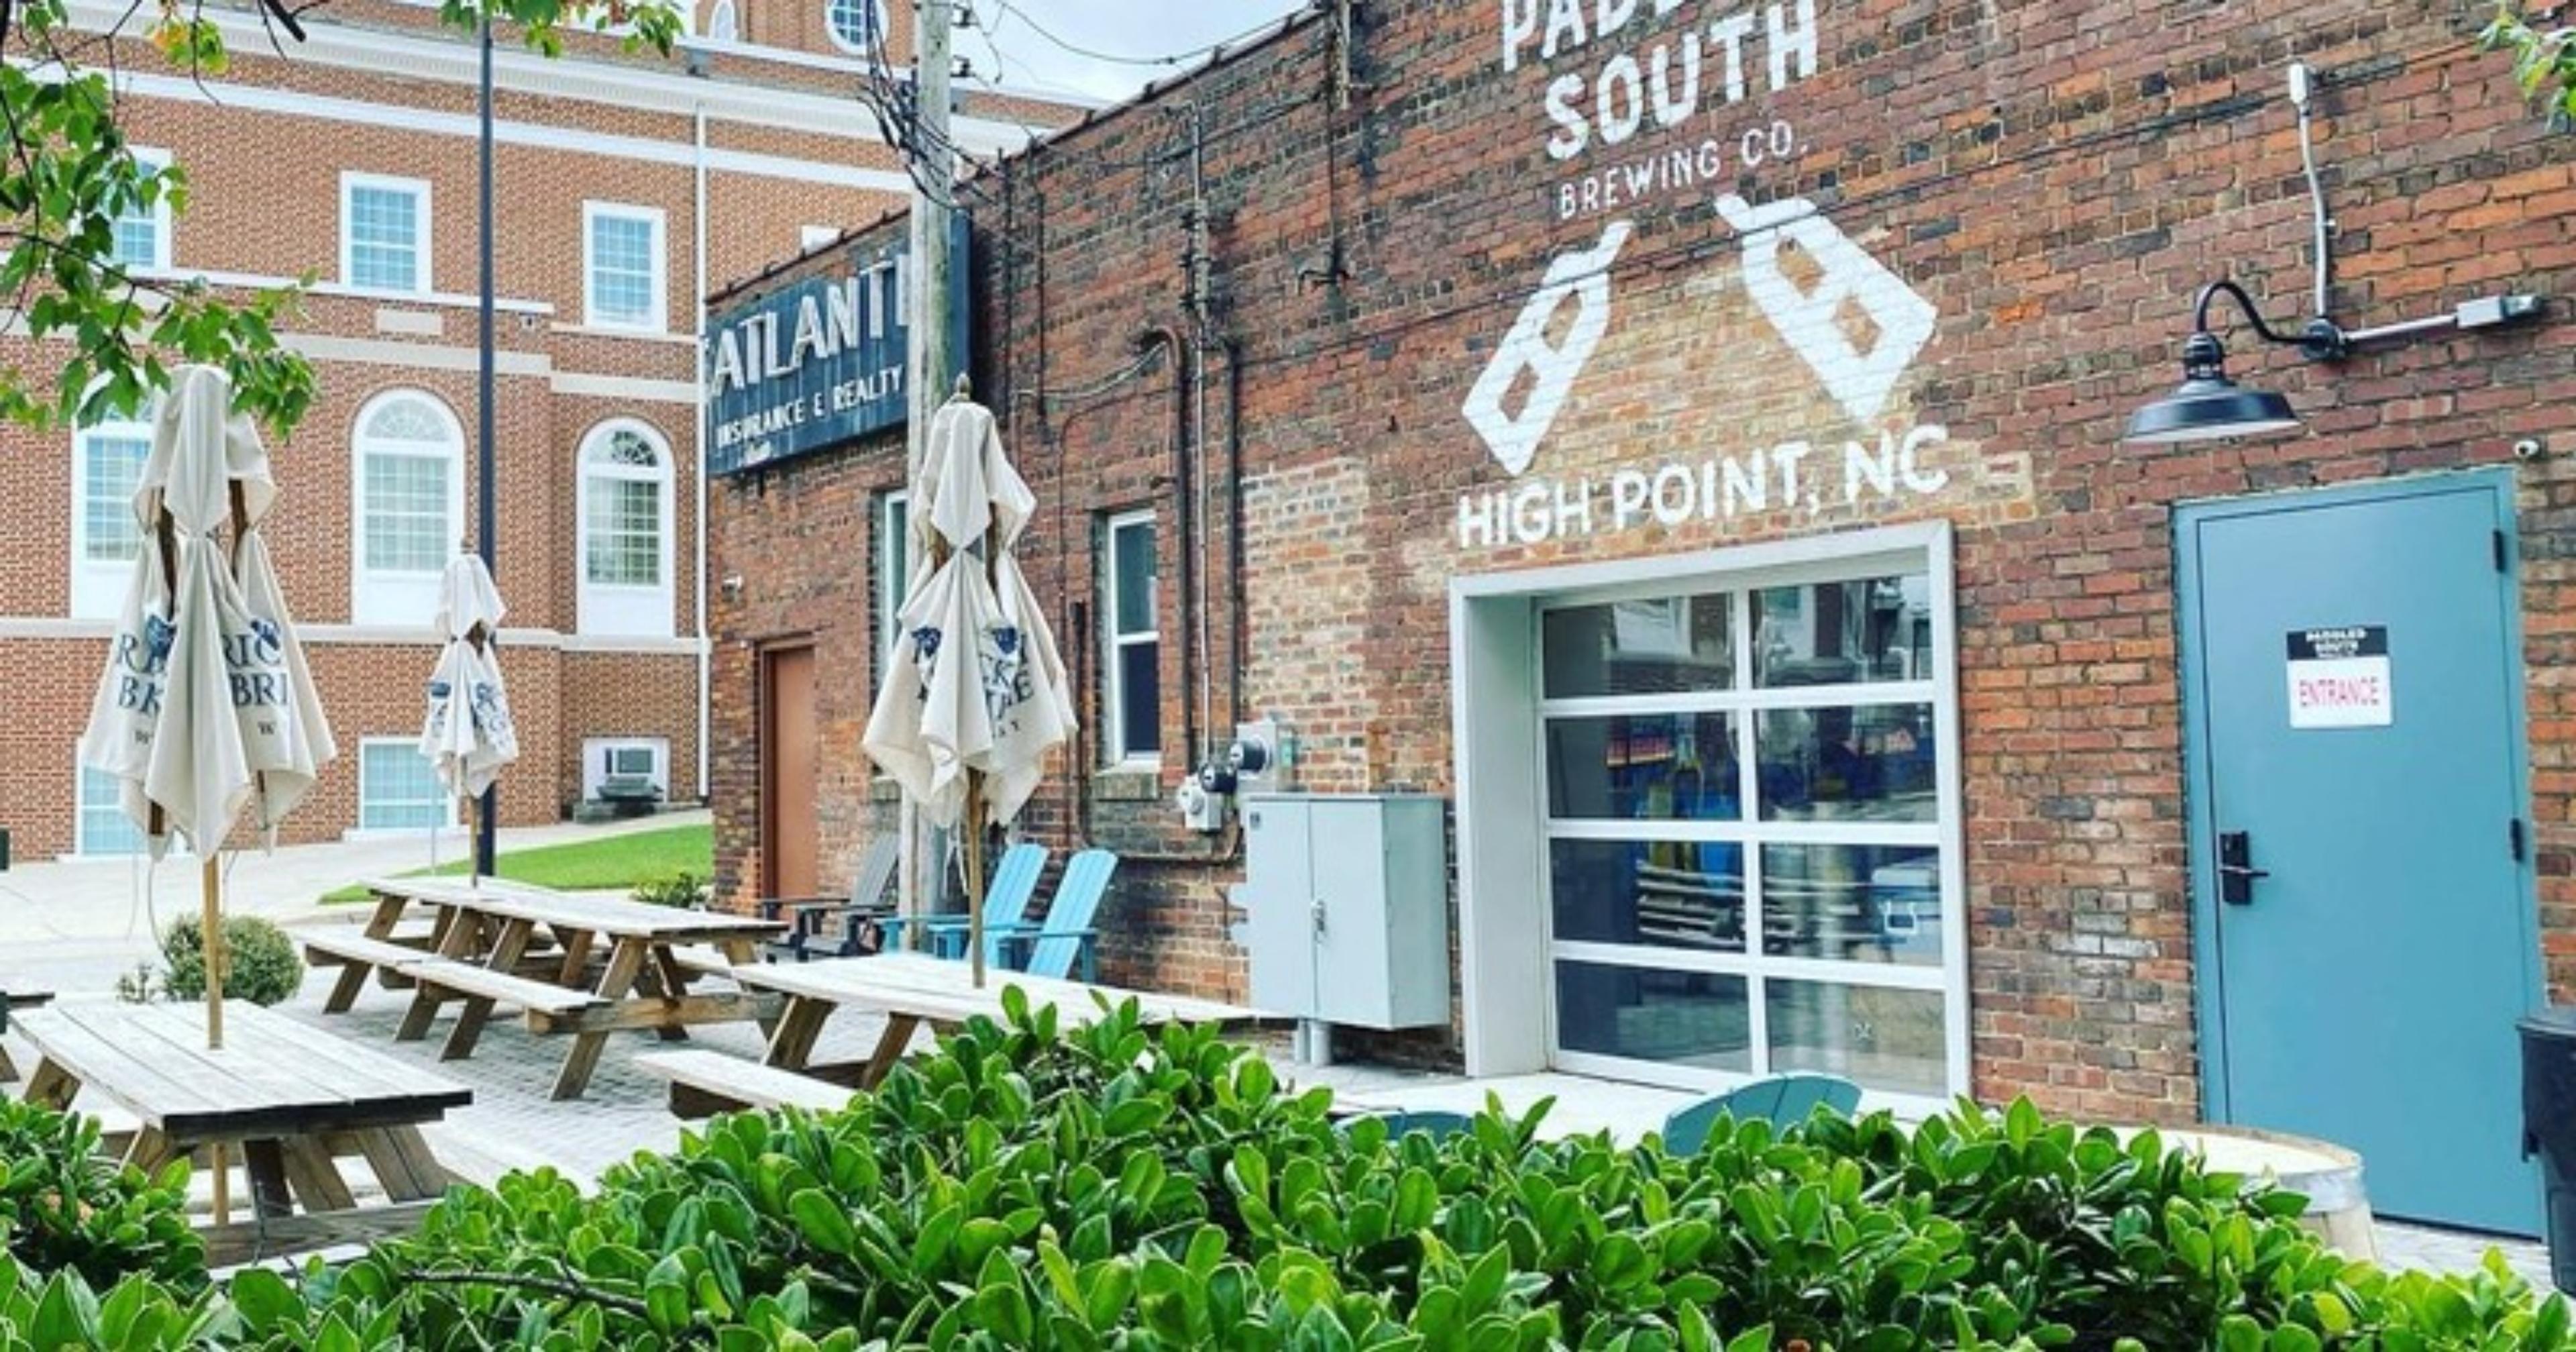 Paddled South Brewing Company